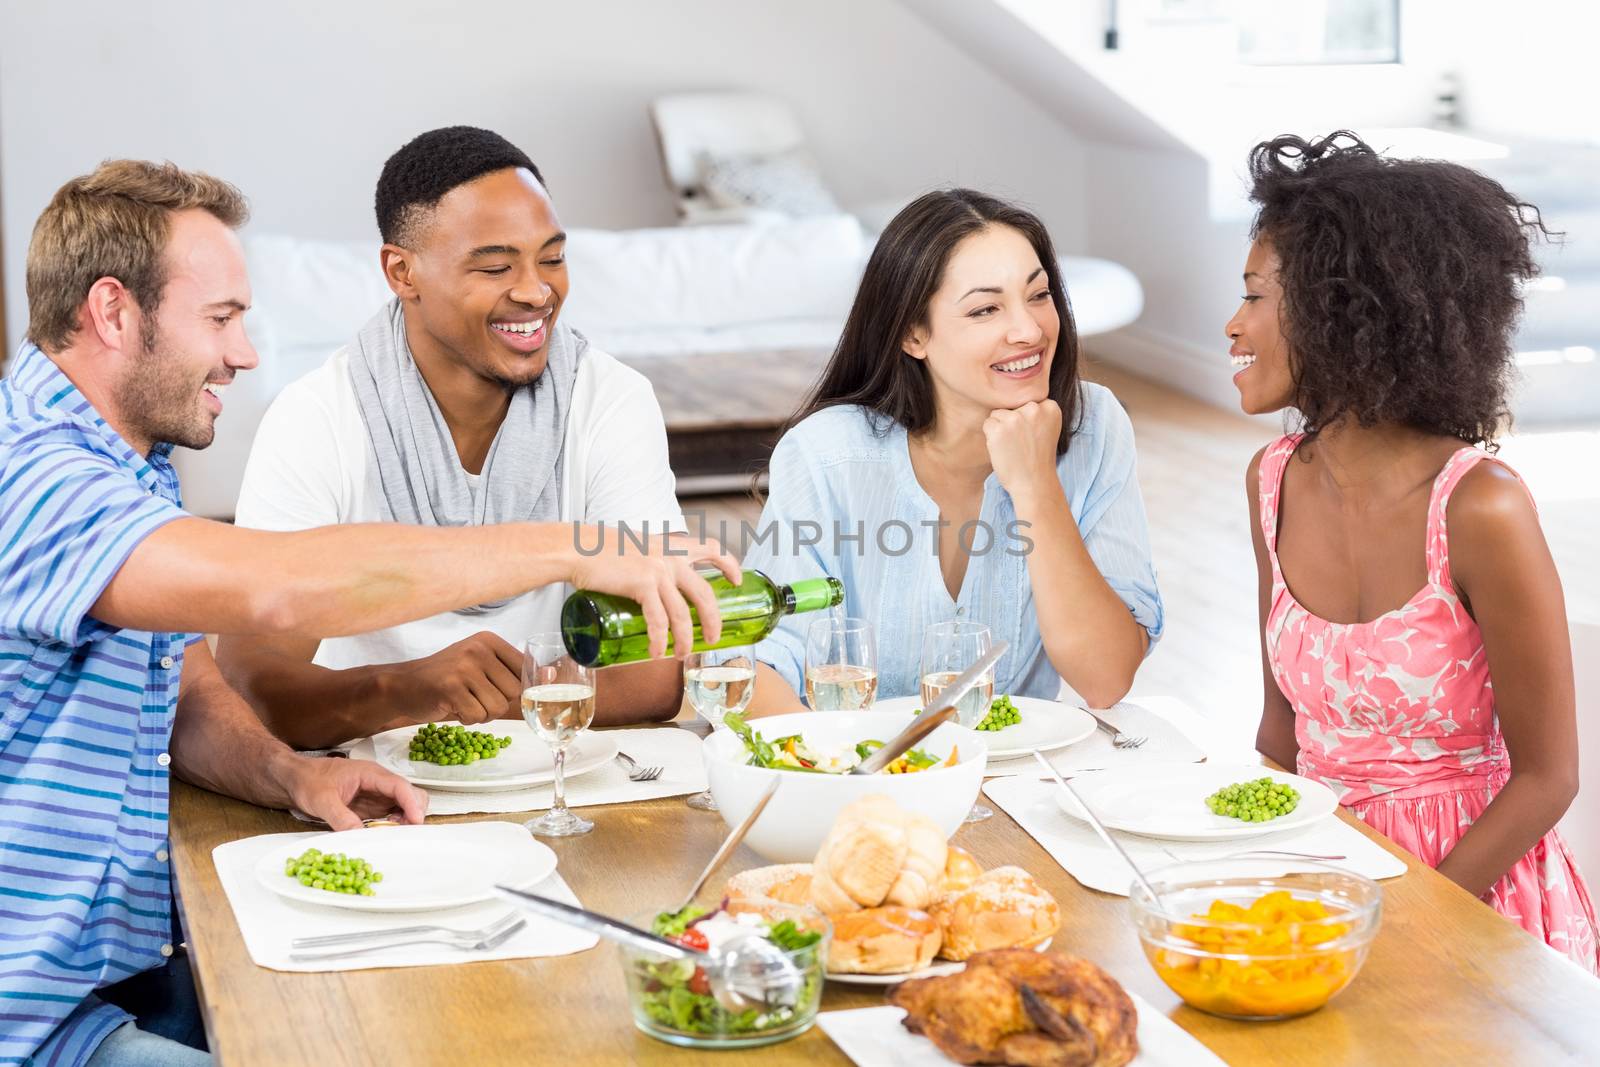 Friends interacting while having a meal at dining table